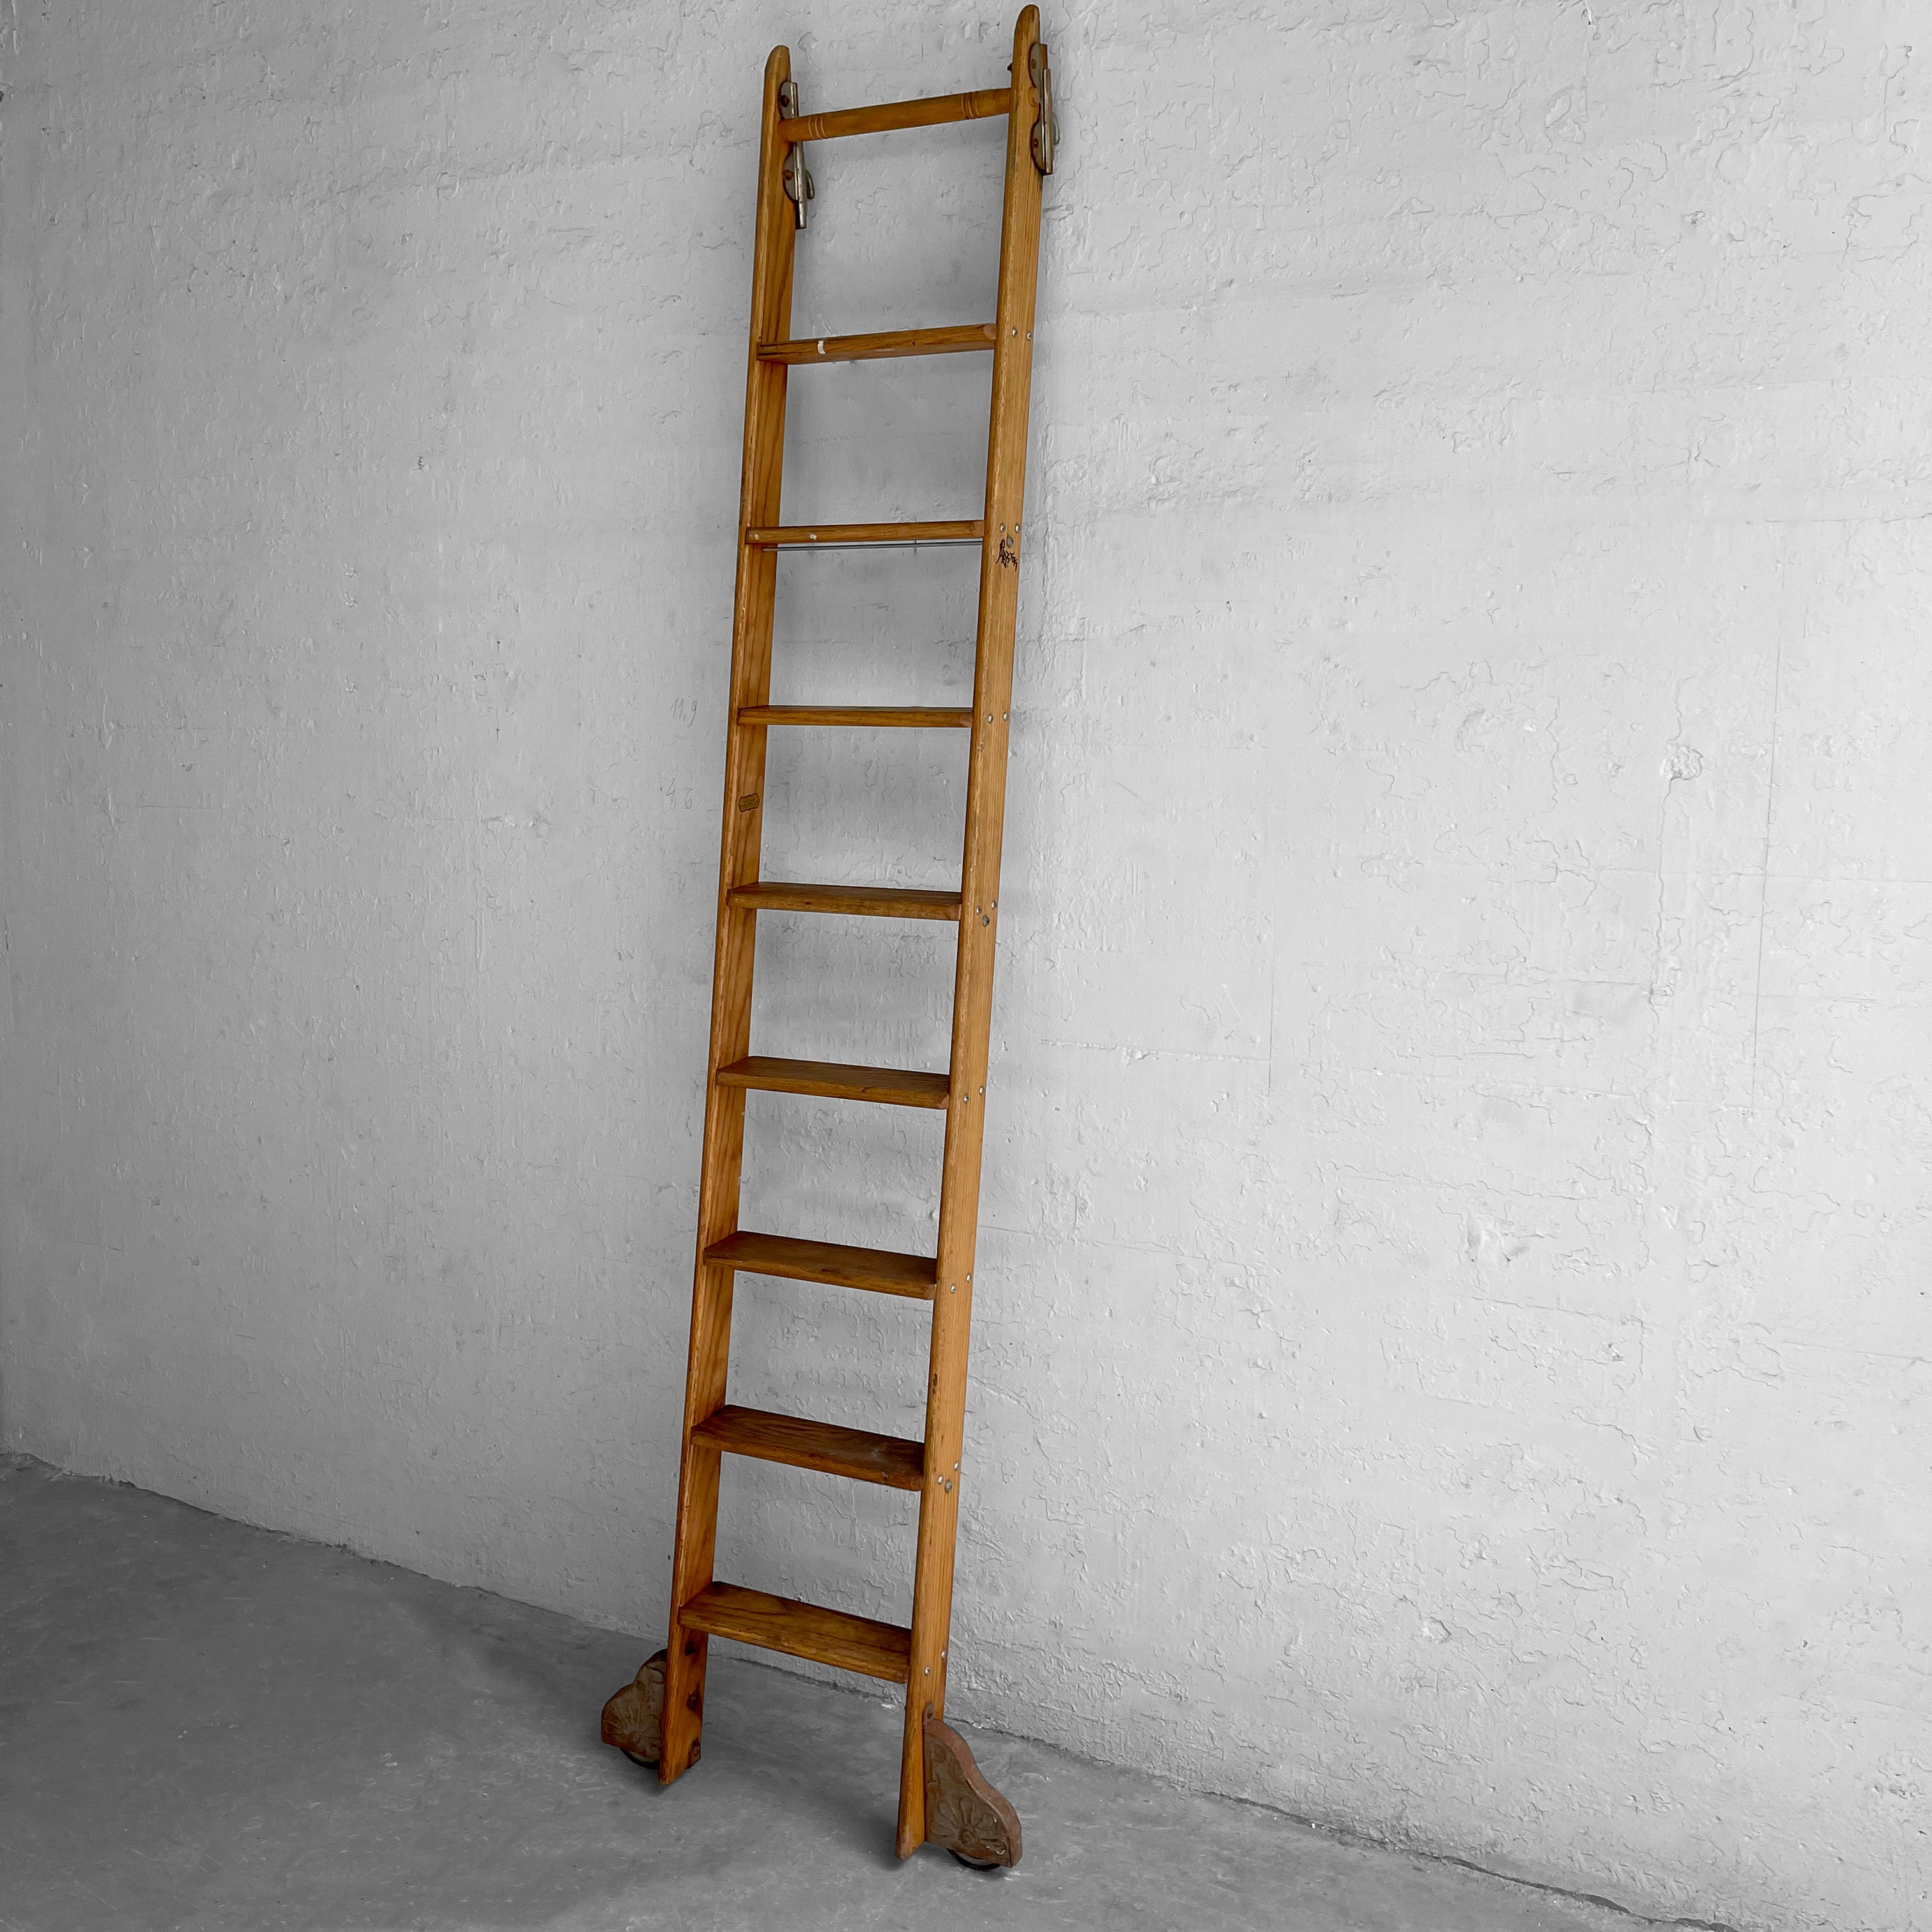 Industrial, work-worn, rolling, oak library ladder by Putnam features decorative steel hardware, hooks at the top and lateral wheels at the bottom that measure 27 inches wide. The ladder width is 16 inches.